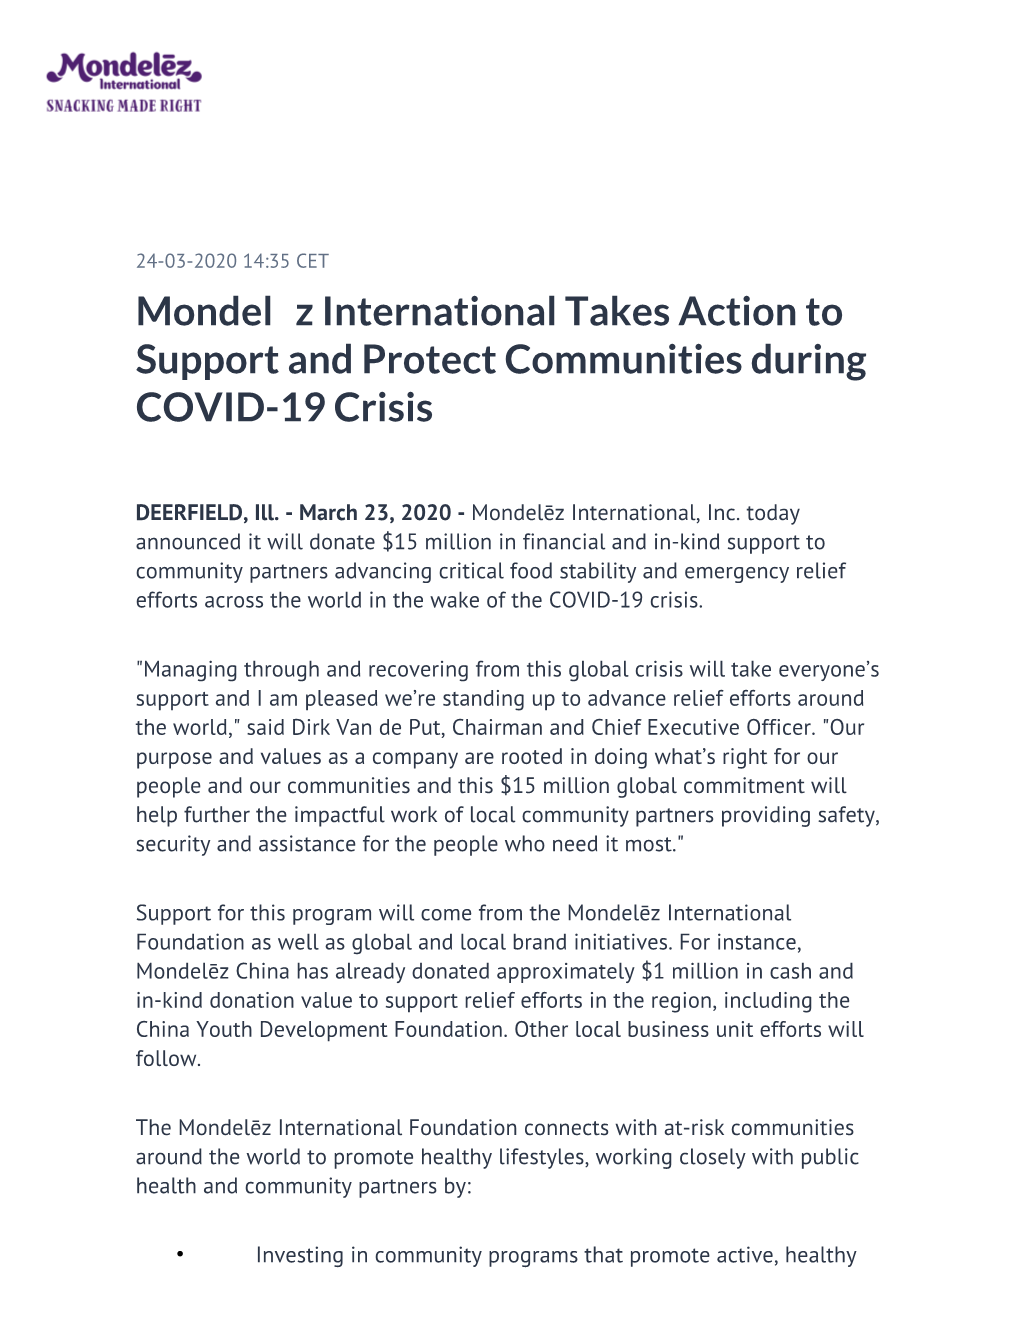 Mondelēz International Takes Action to Support and Protect Communities During COVID-19 Crisis